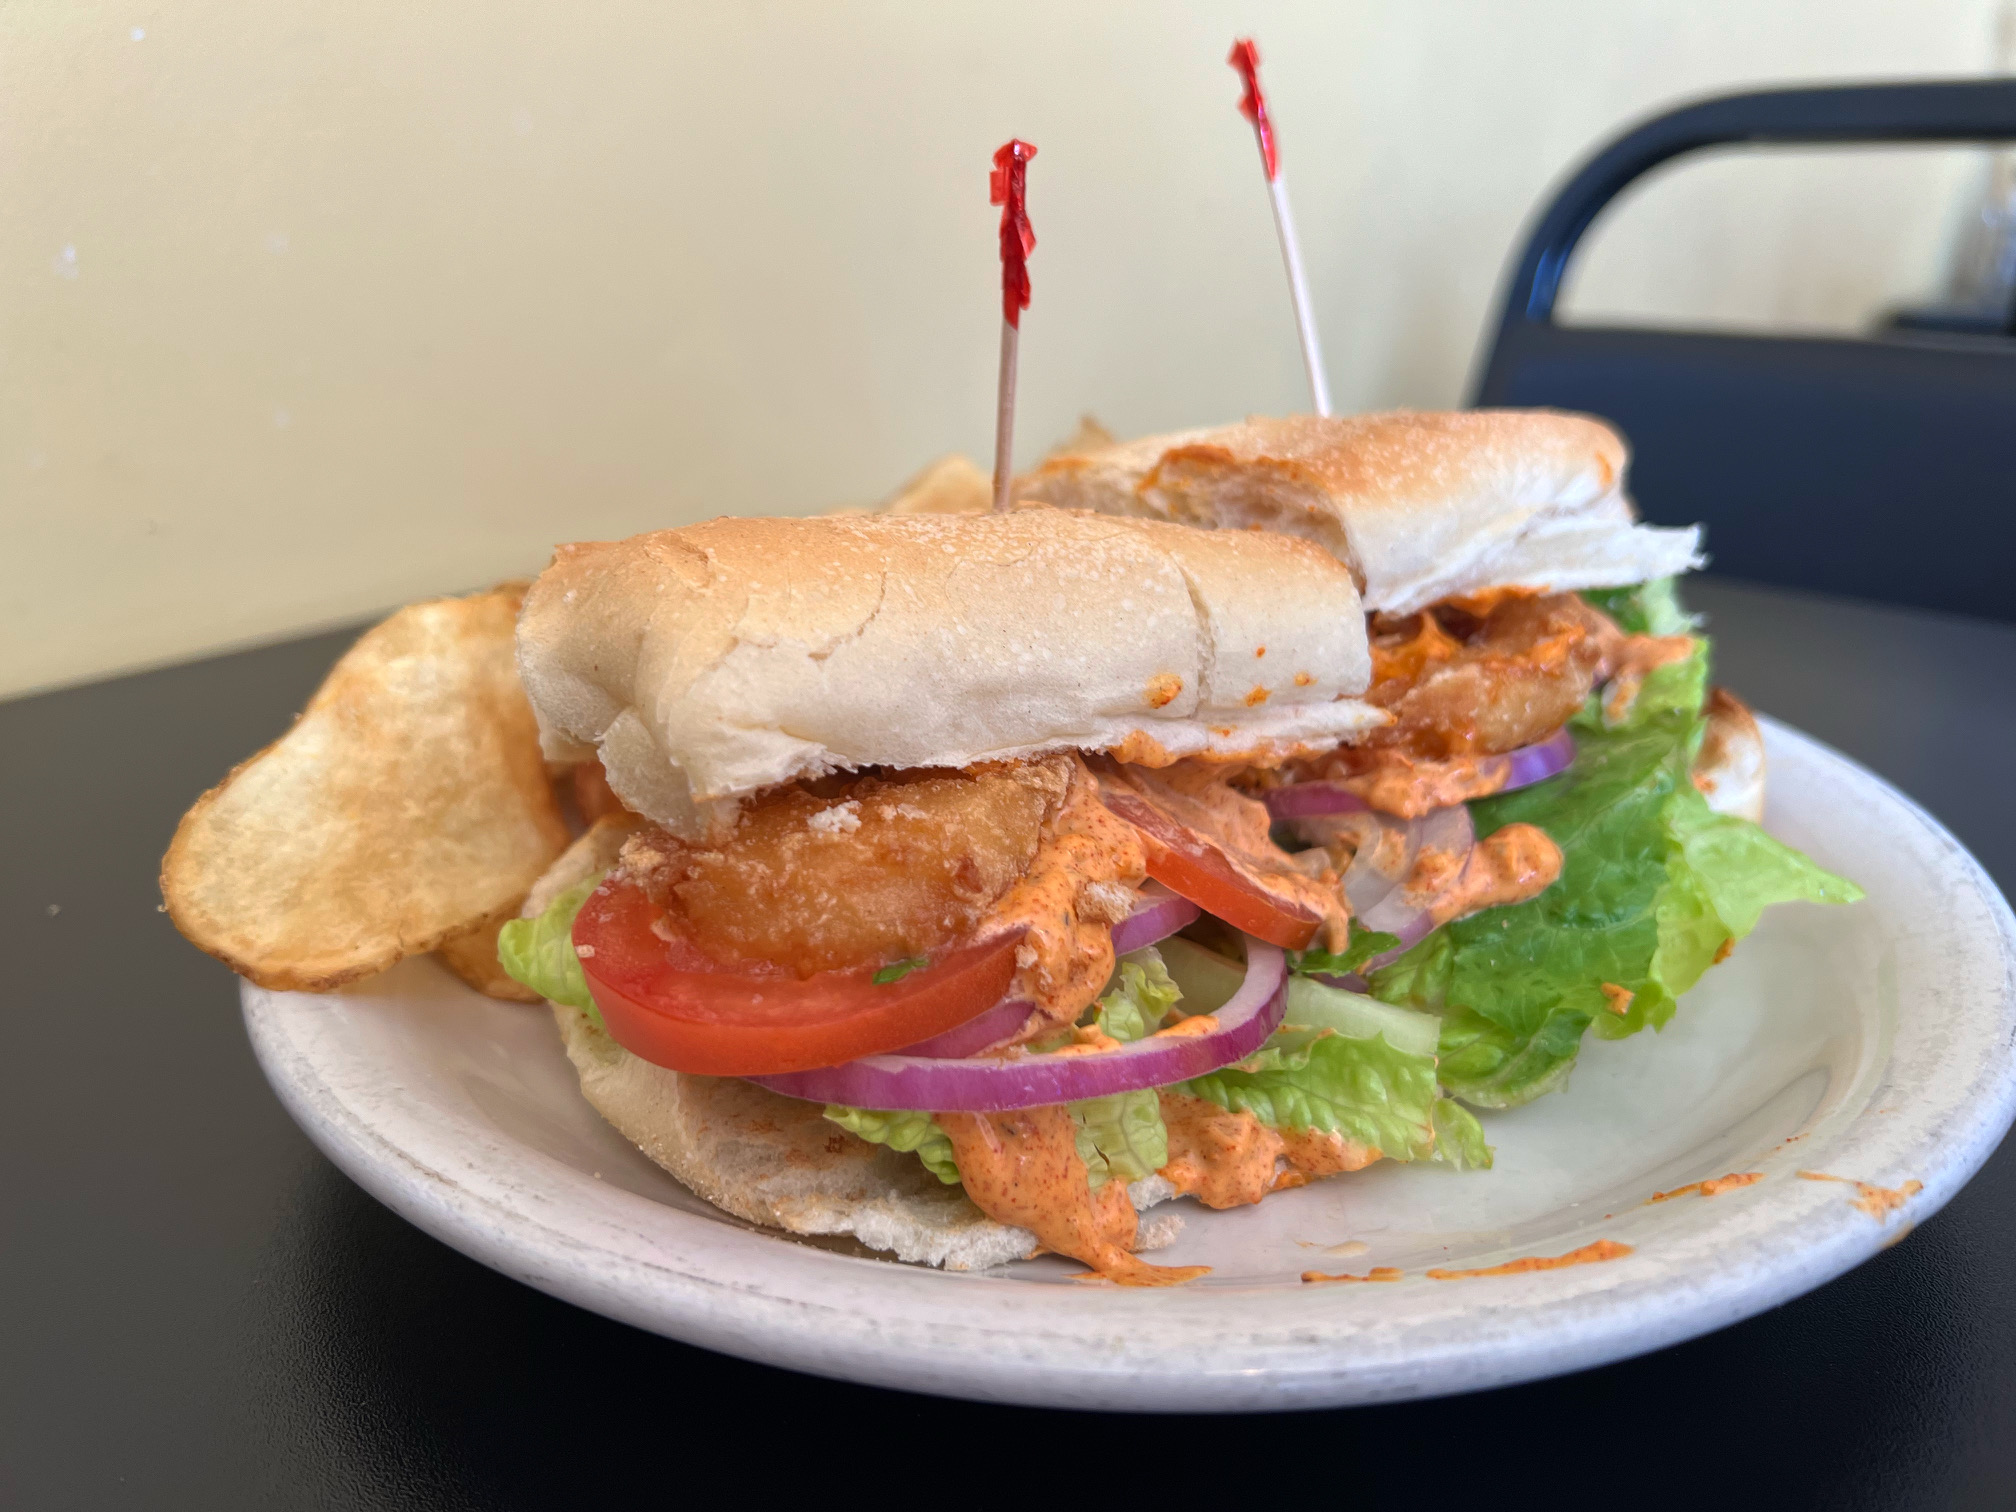 On a white plate, there is a sandwich with an orange sauce and toppings falling out of it. There are two toothpicks, one in each side of the sandwich. Photo by Alyssa Buckley.